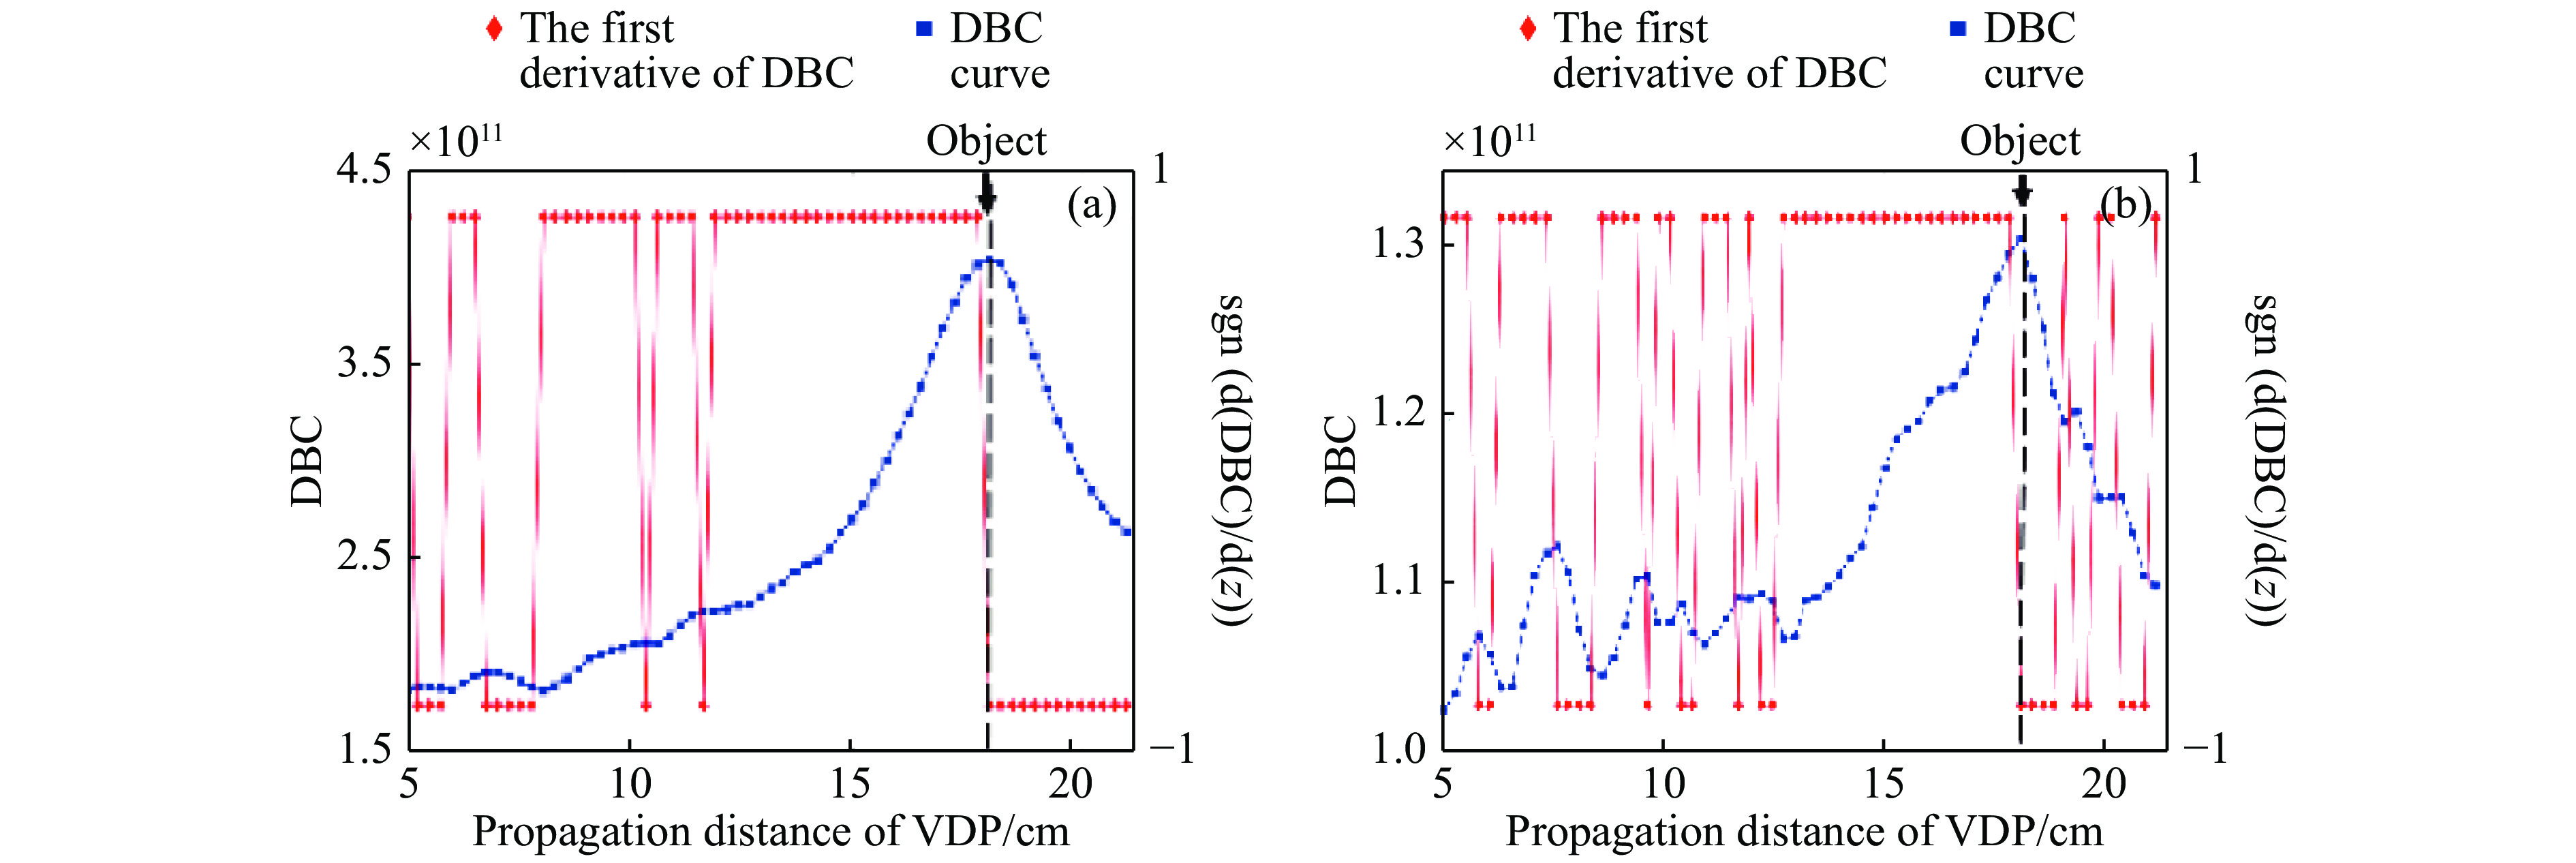 DBC curves and the first derivative of DBC curves with different sampling numbers when the object is a double-slit. (a) 5000 samplings; (b) 2000 samplings